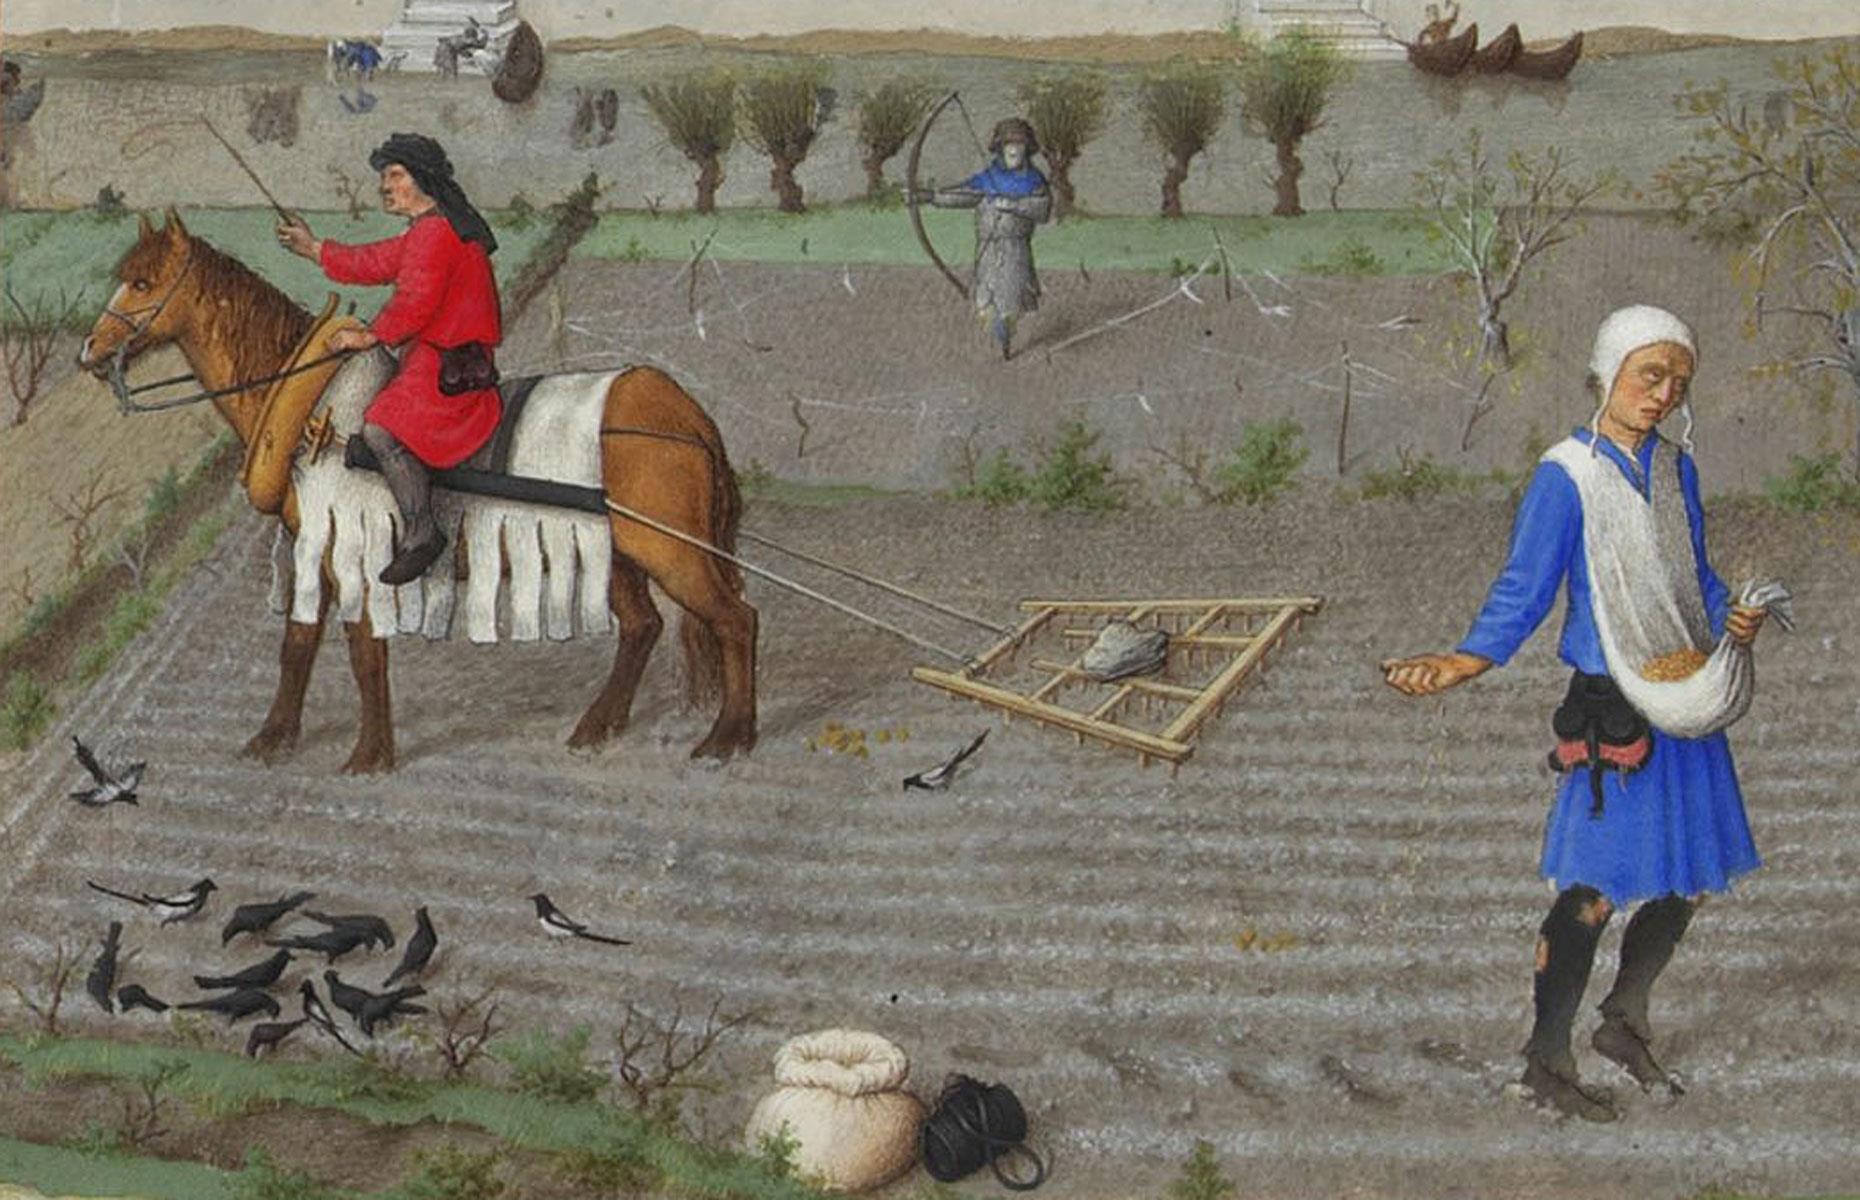 Peasant in medieval England: eight hours a day, 150 days a year